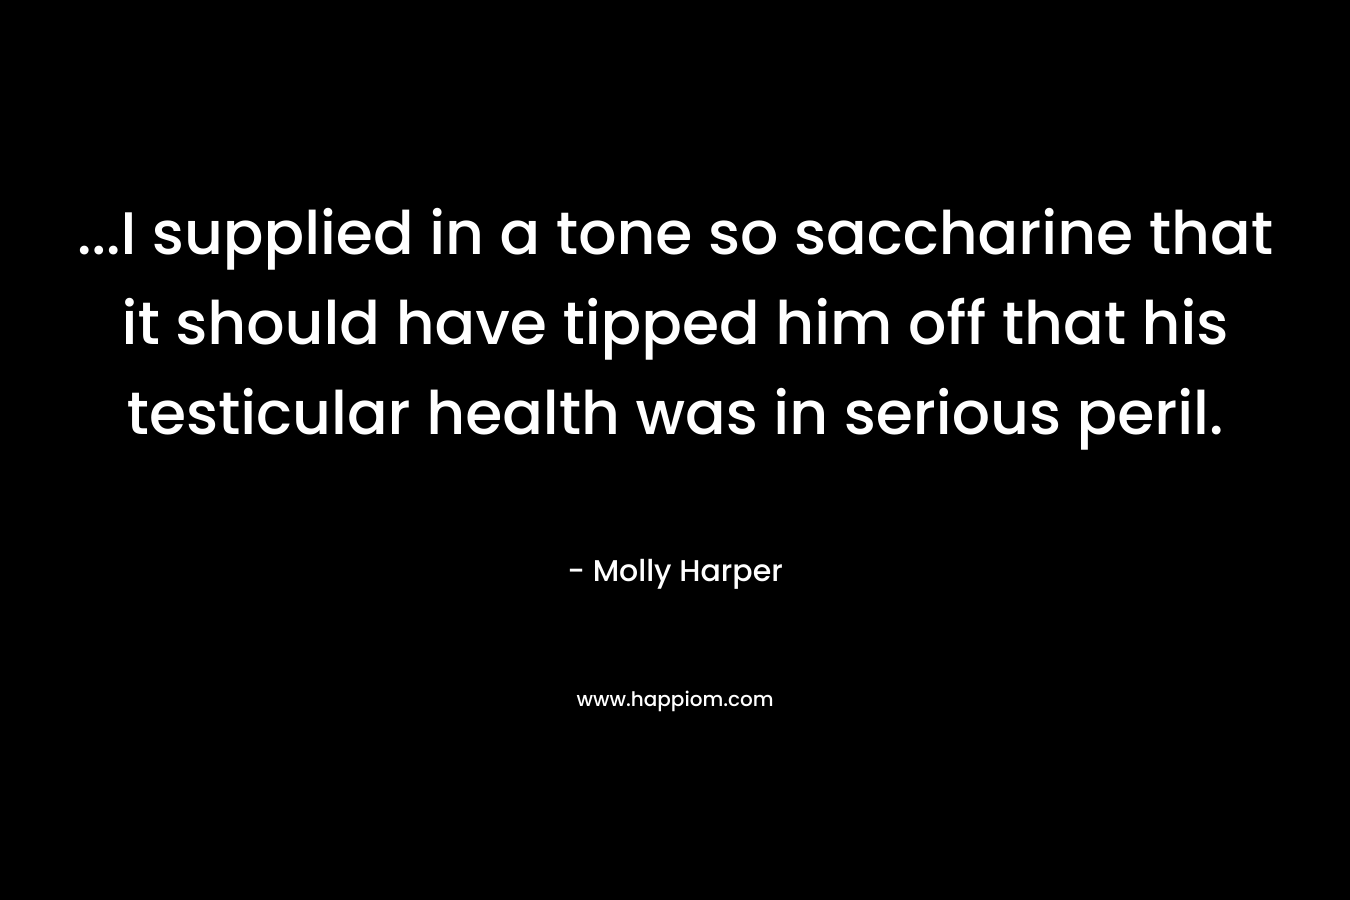 …I supplied in a tone so saccharine that it should have tipped him off that his testicular health was in serious peril. – Molly Harper